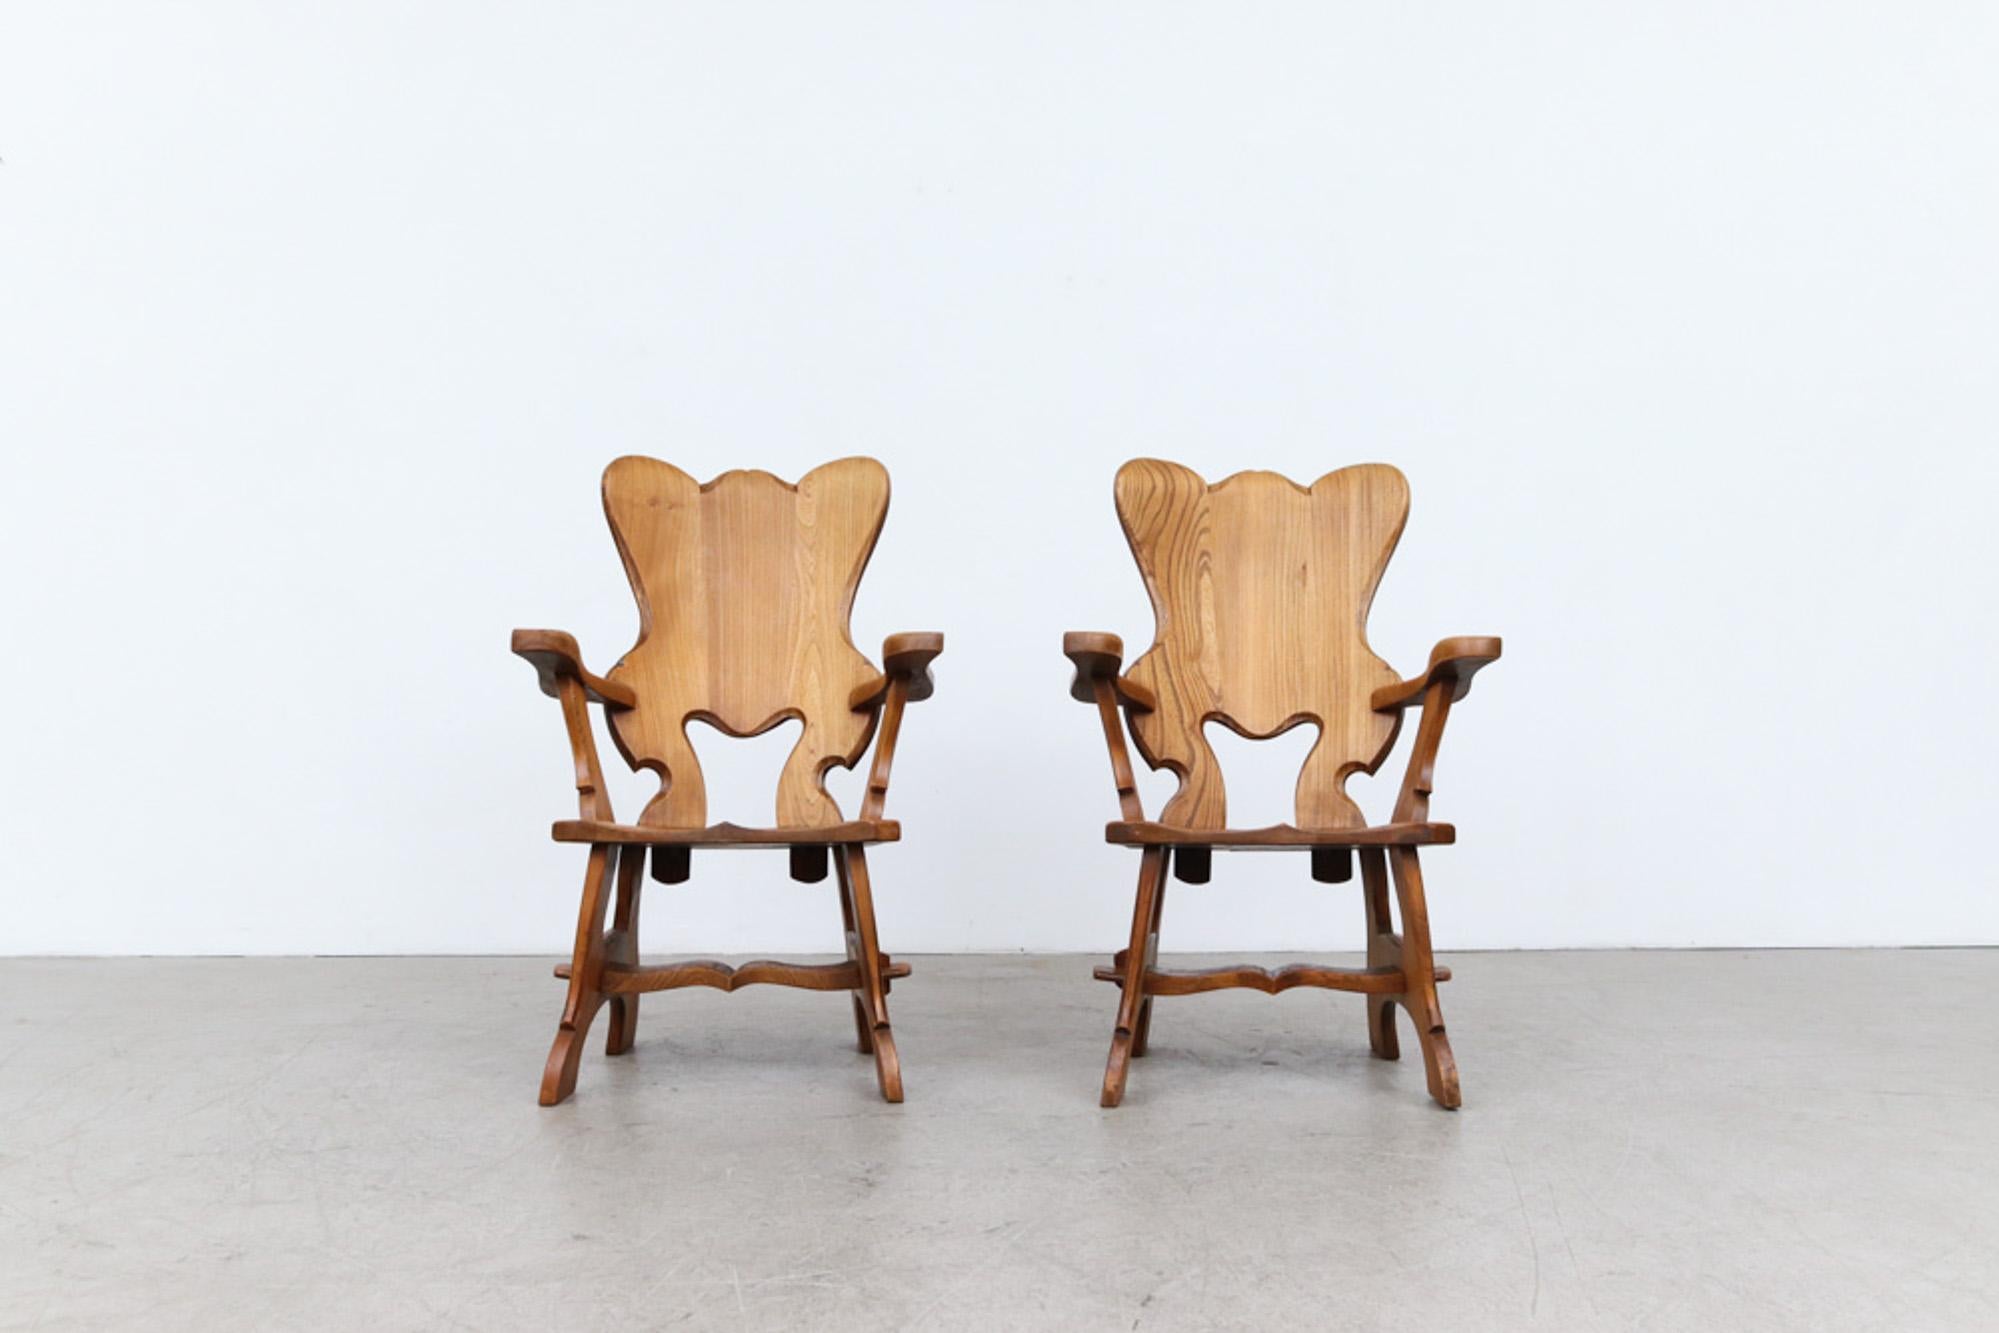 Beautifully carved pair of French Brutalist oak throne-like arm chairs. In original condition, wear is consistent with age and use. Other sets of Brutalist chairs available and listed separately (LU922424637792, LU922425034782 and LU922424855742).